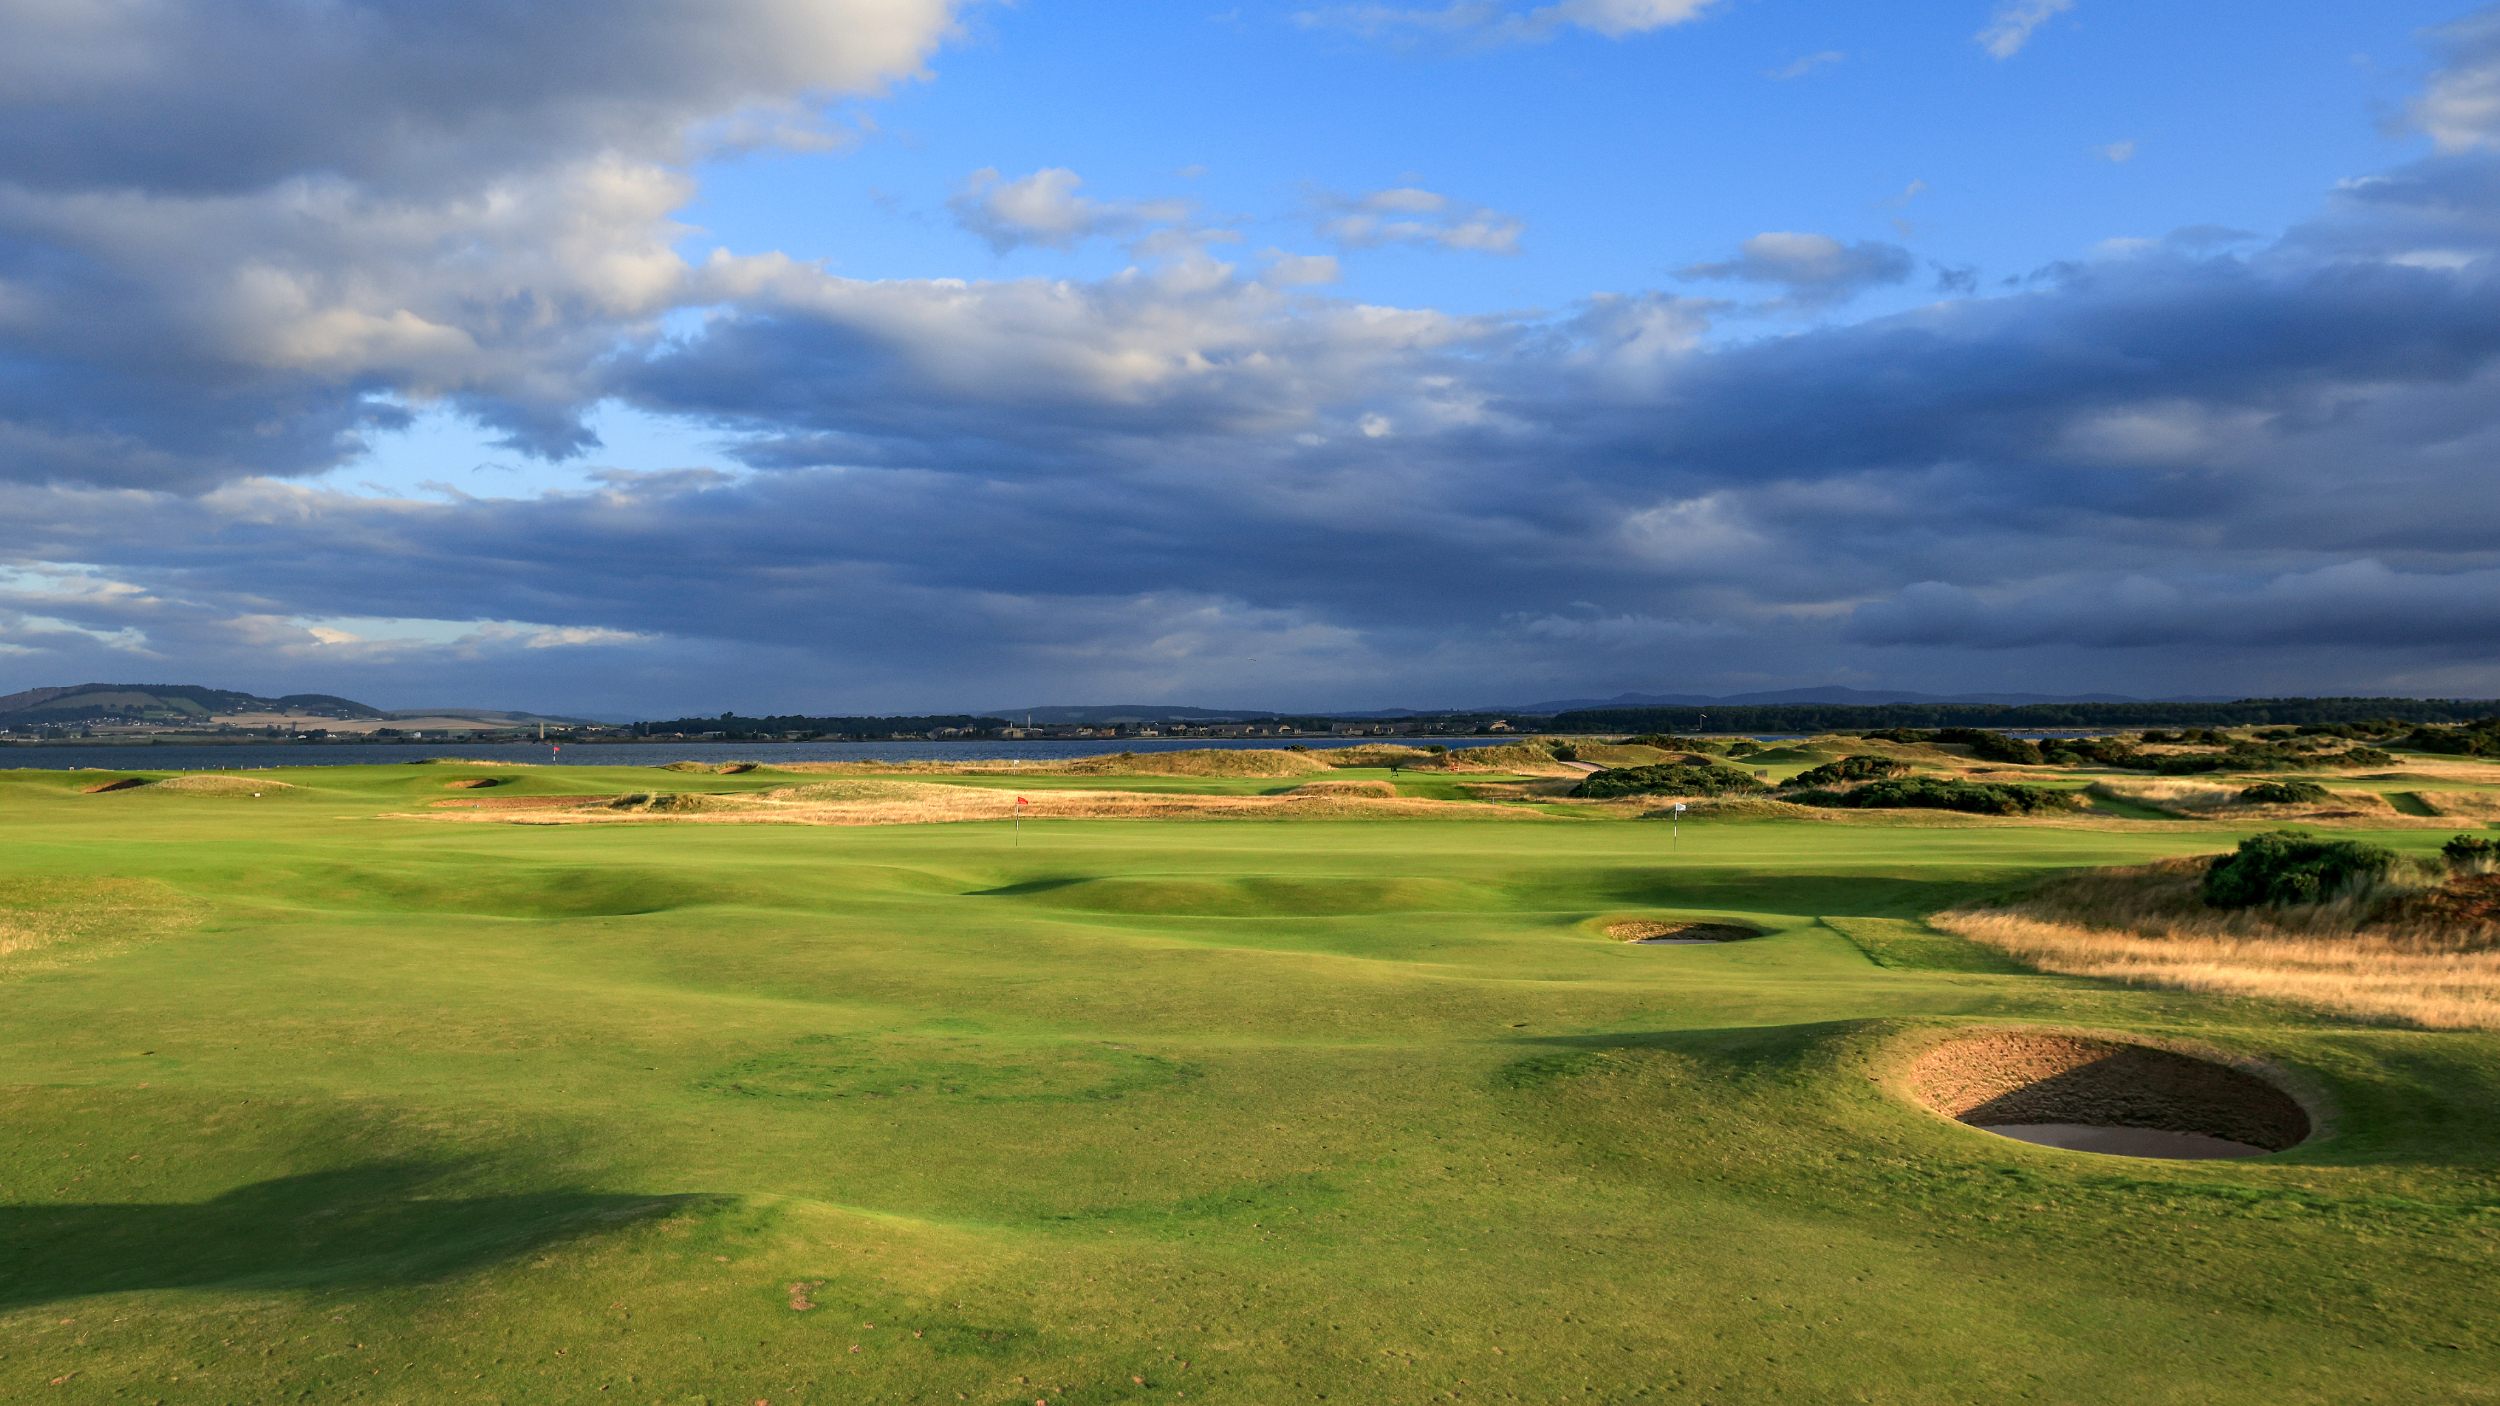 The approach to the green at the 10th hole at The Old Course, St Andrews